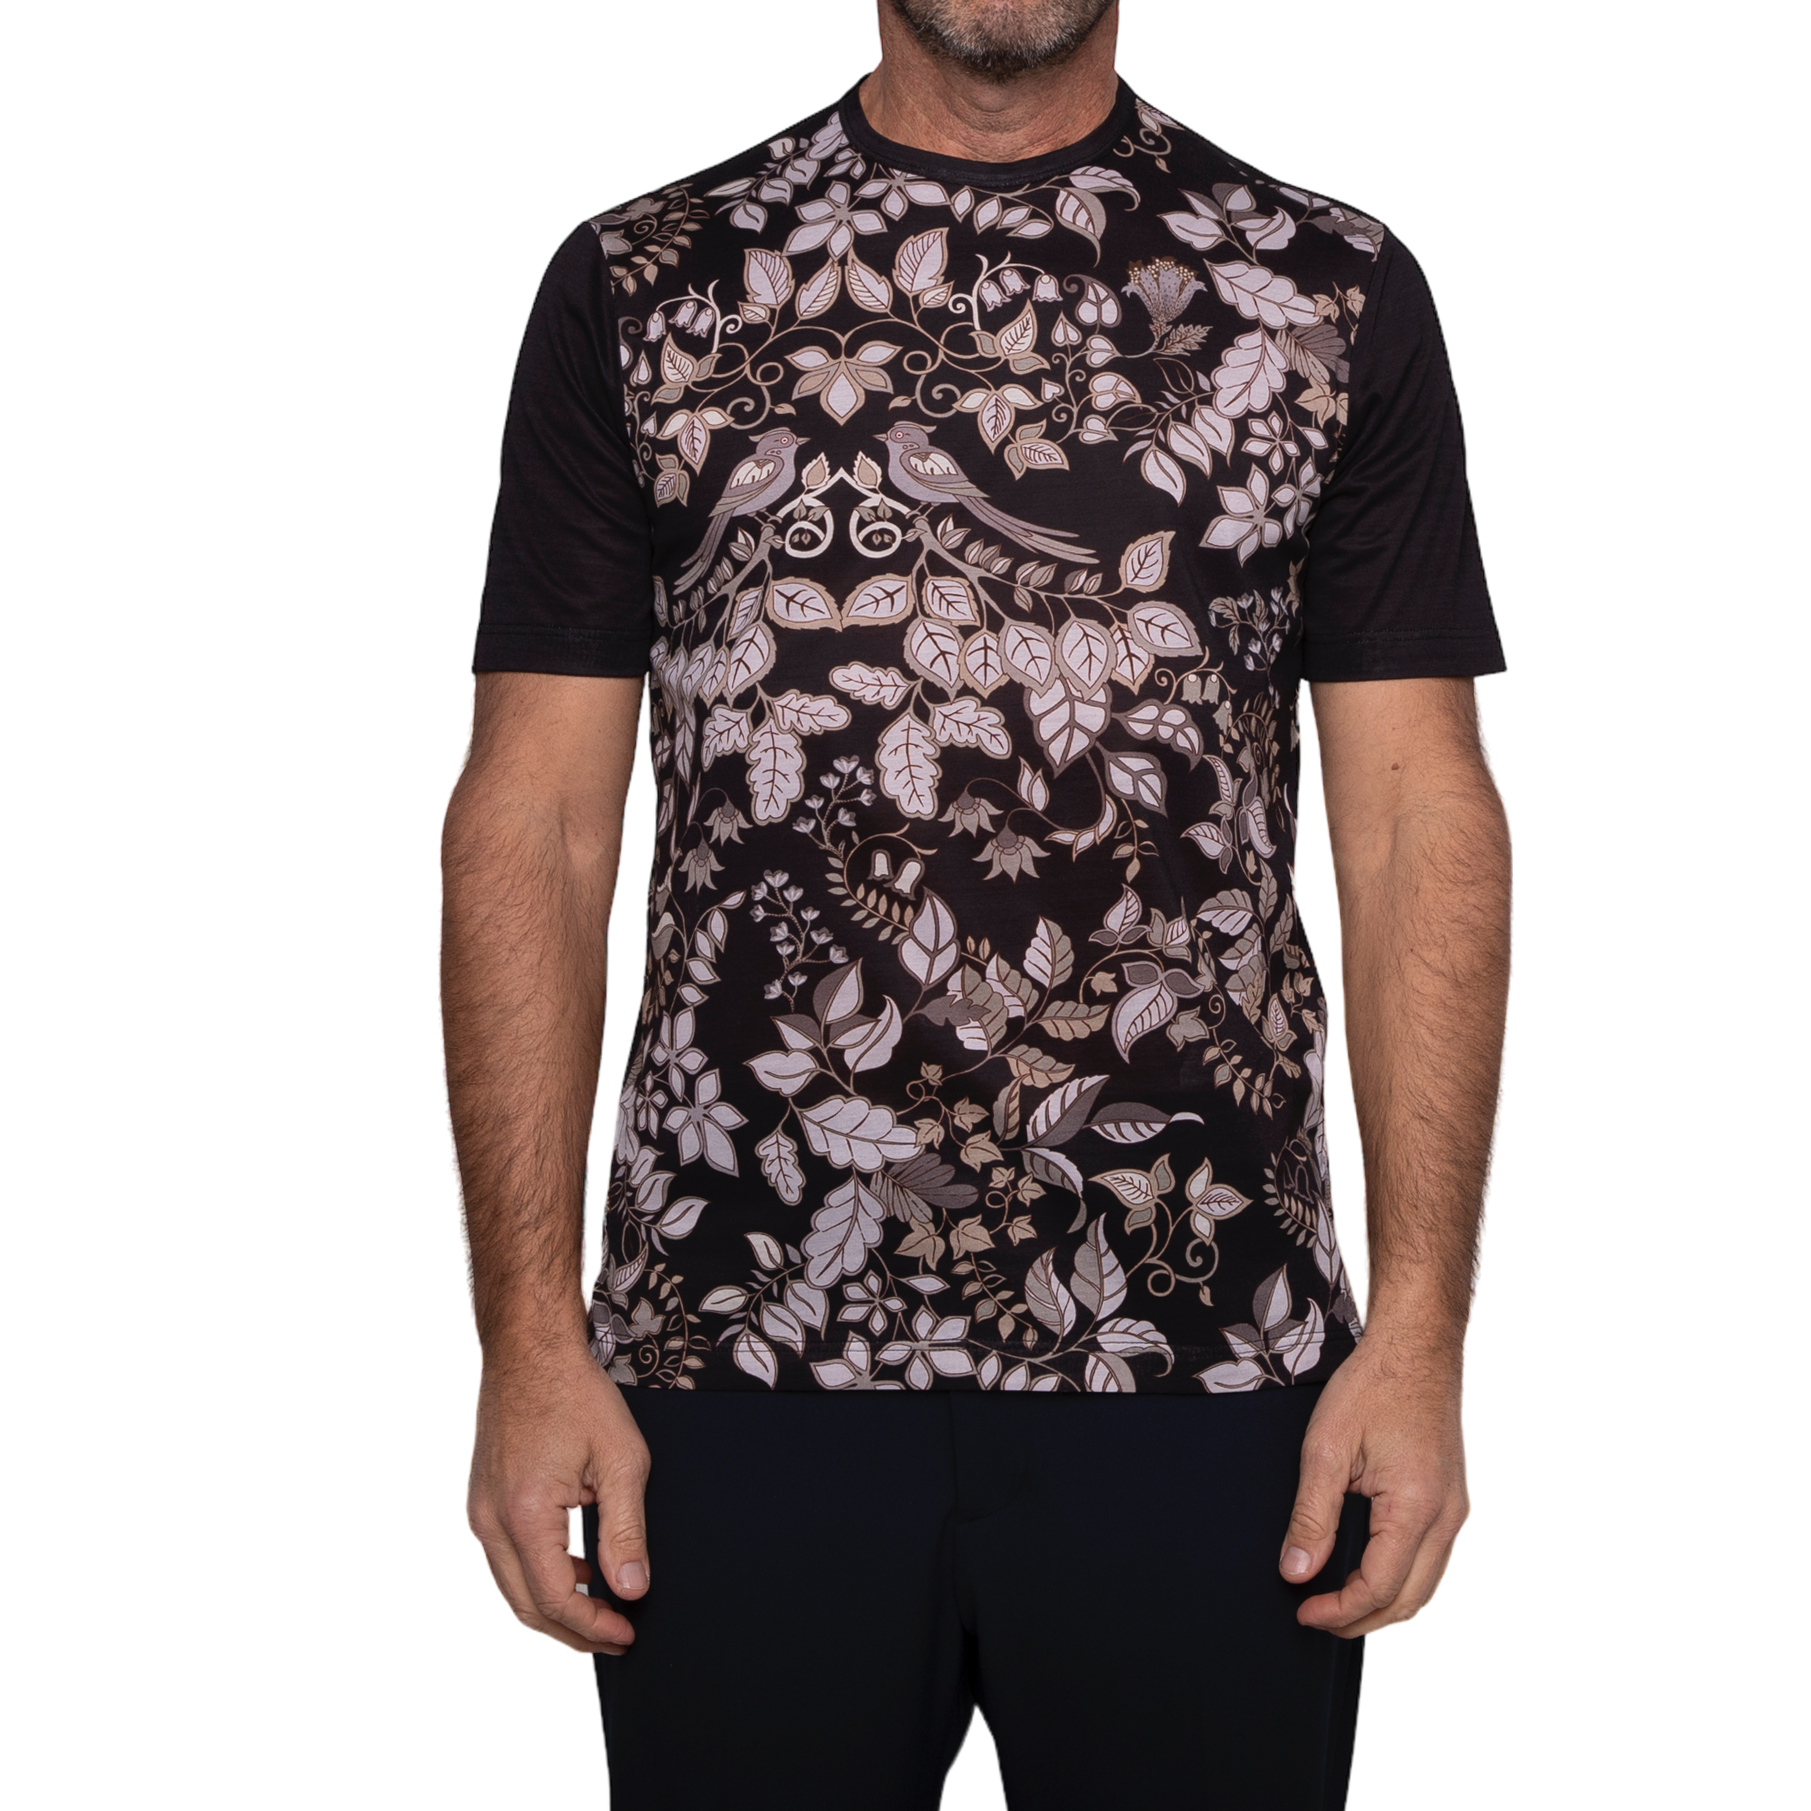 100% cotton t-shirt, sartorial fit, foliage and birds pattern, made in ...